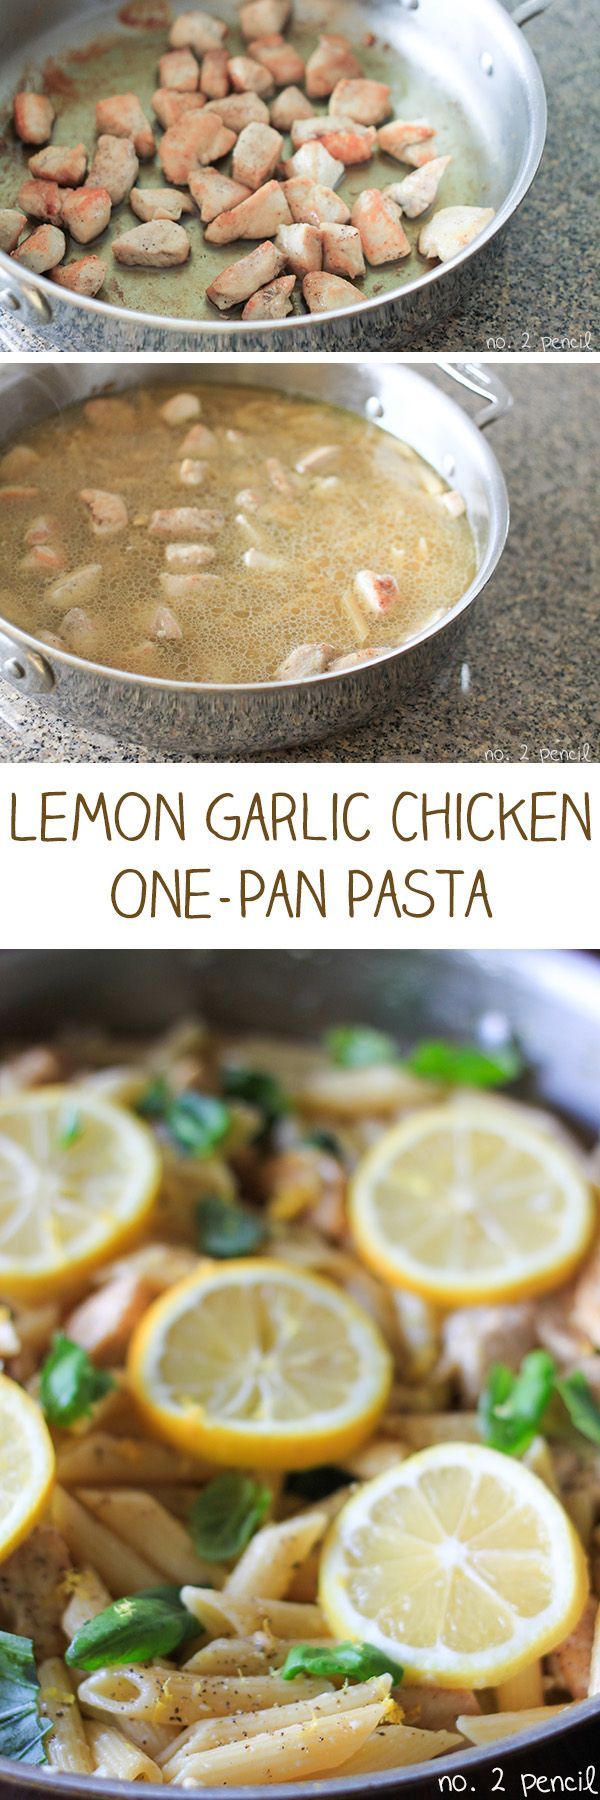 One-Pan Lemon Garlic Chicken Pasta…..I thought this was really good, takes about a half hour, nice you only have to dirty one